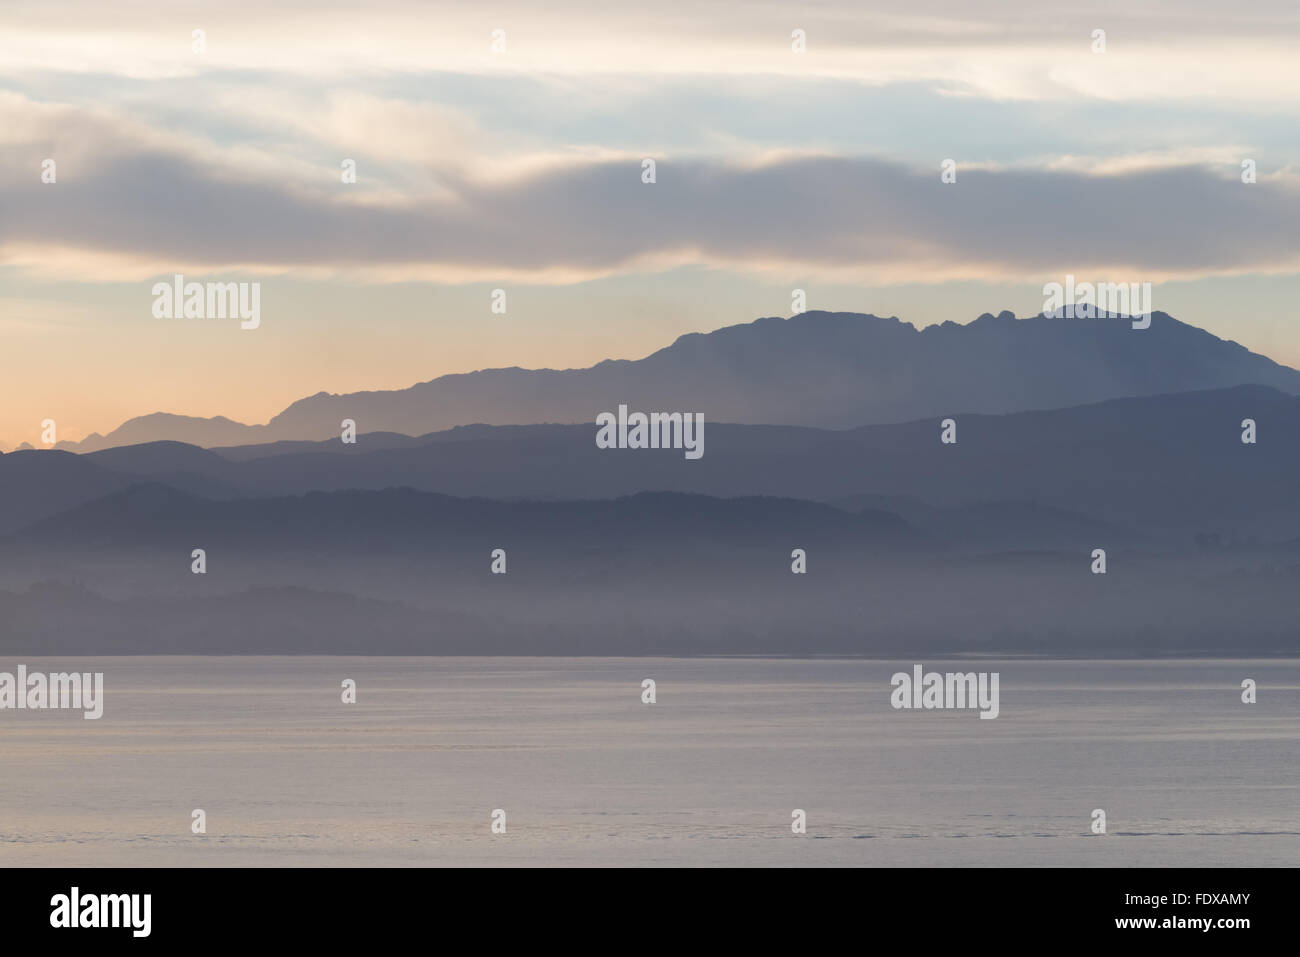 Layer of mountains in the mist. Northern Spain Stock Photo